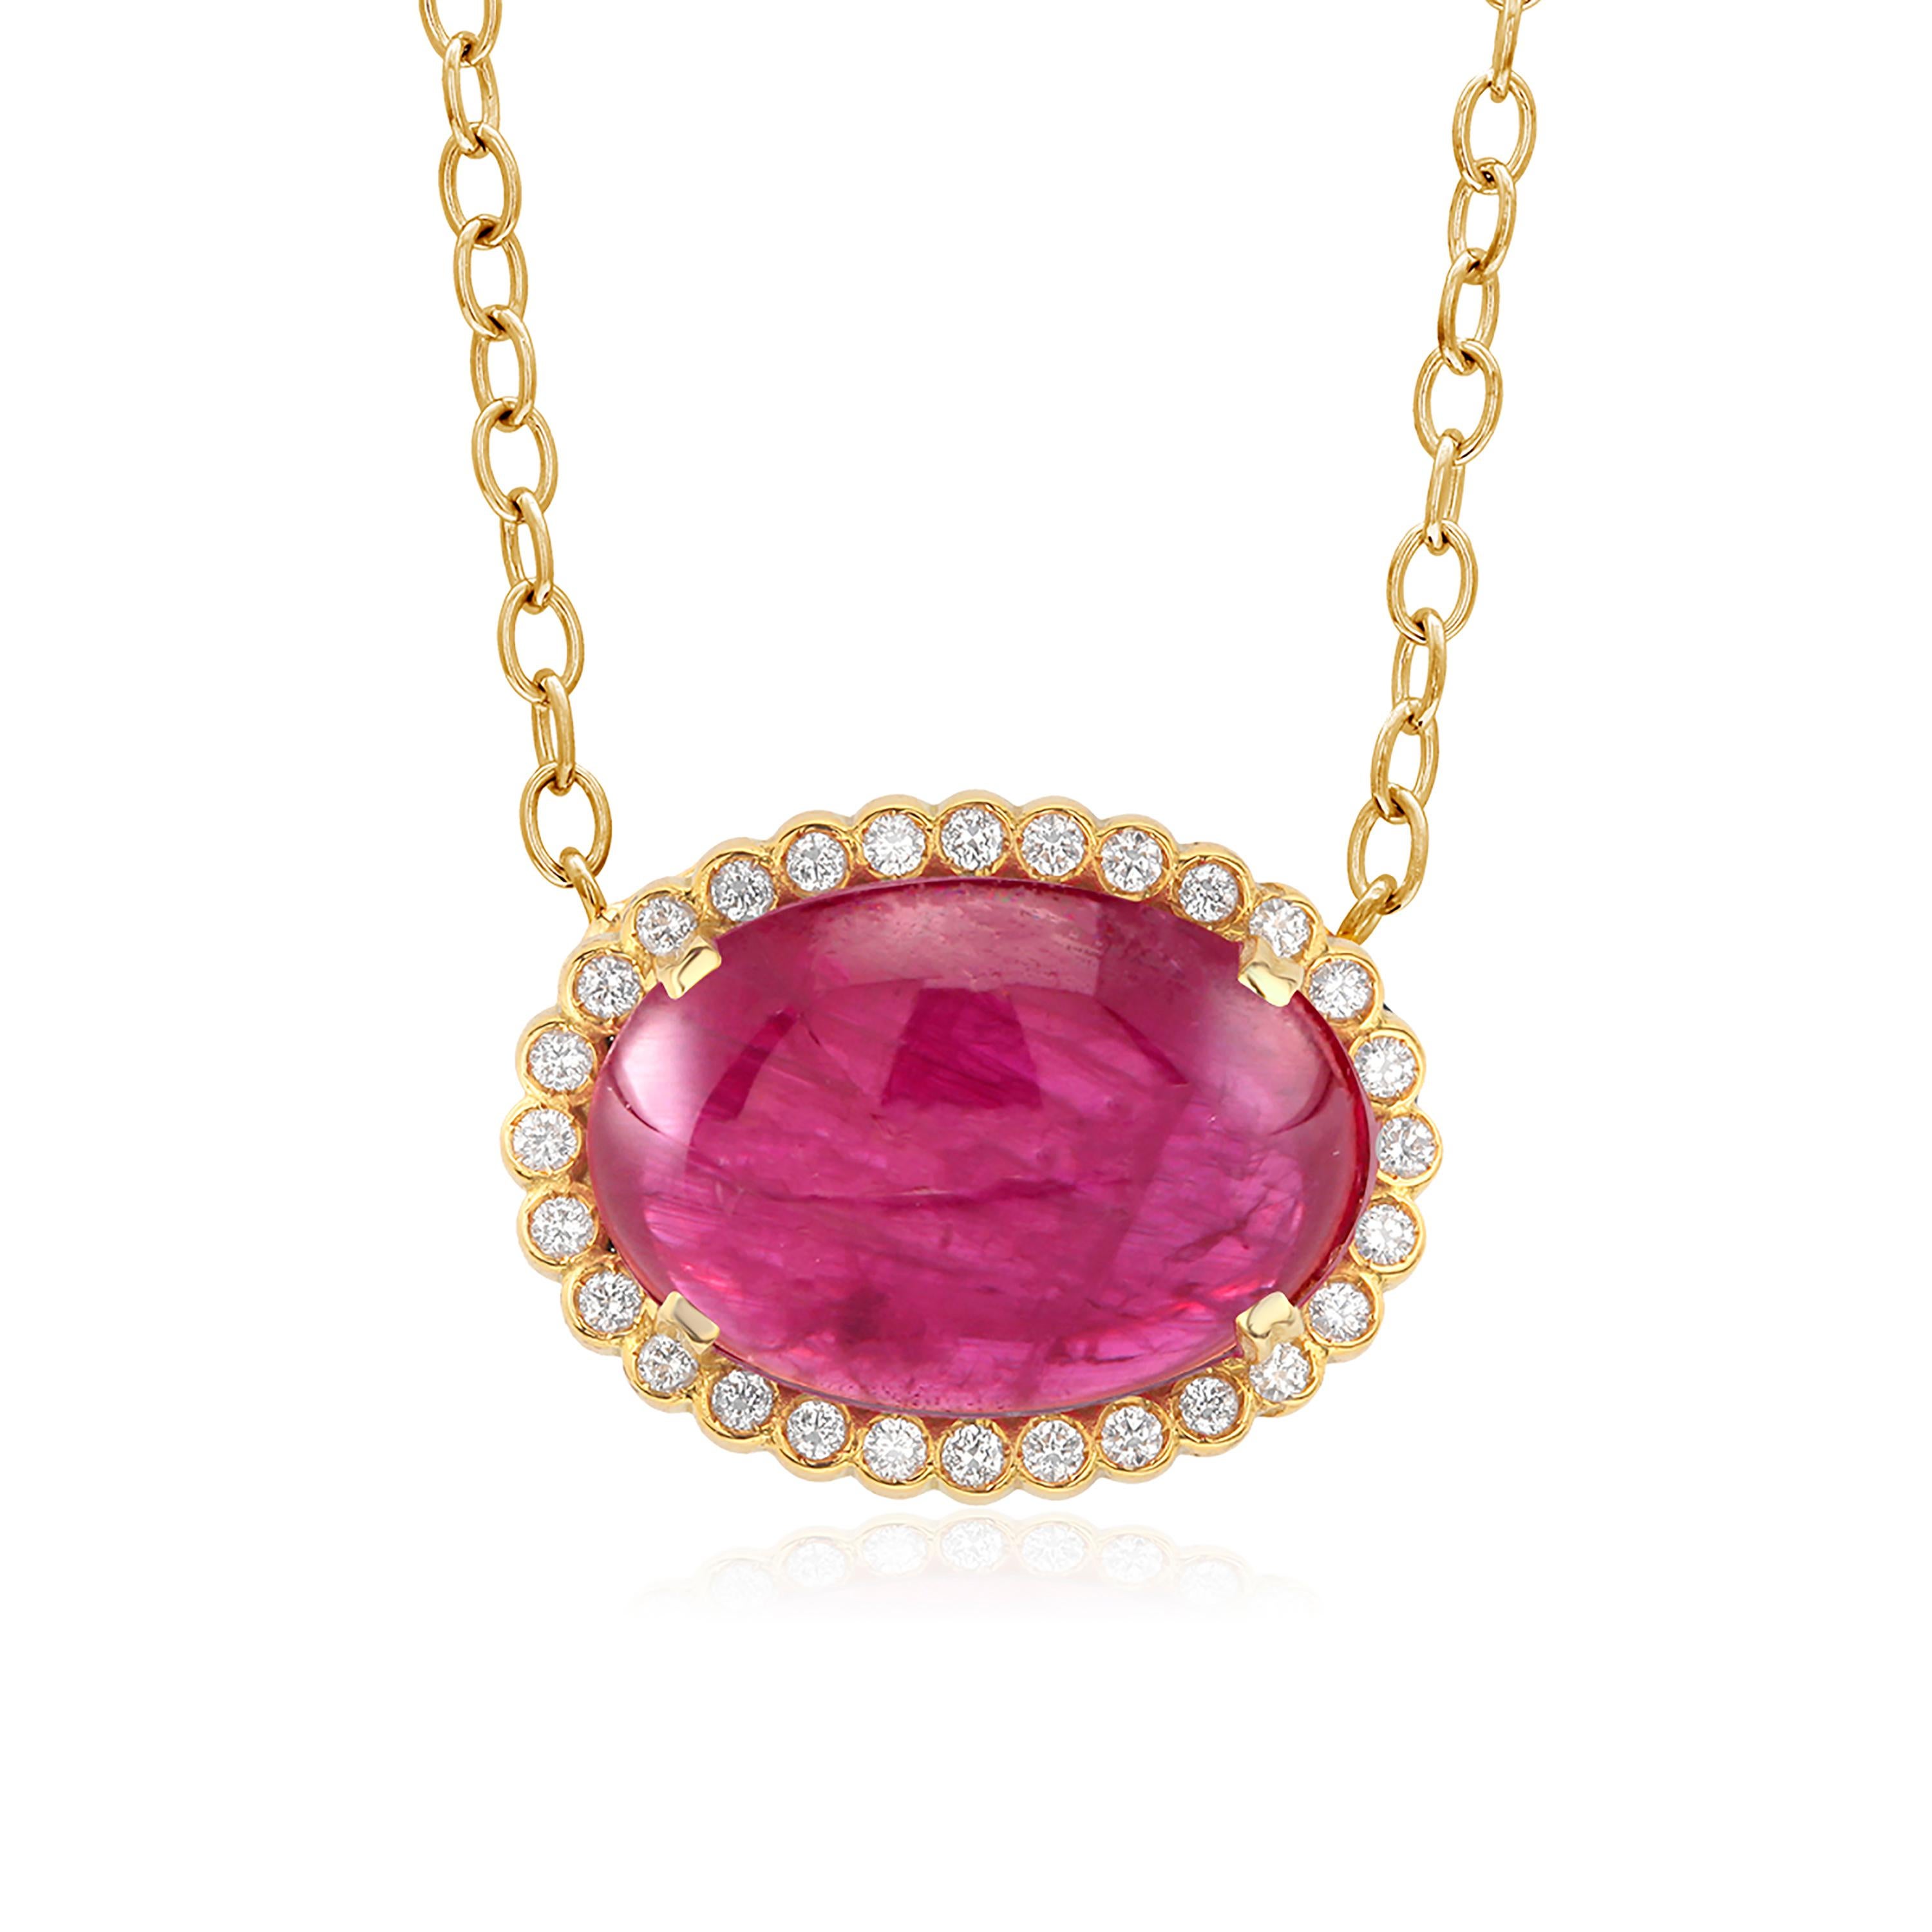 Cabochon Burma Ruby Diamond Gold Drop Necklace Pendant Weighing 21.86 Carat In New Condition In New York, NY